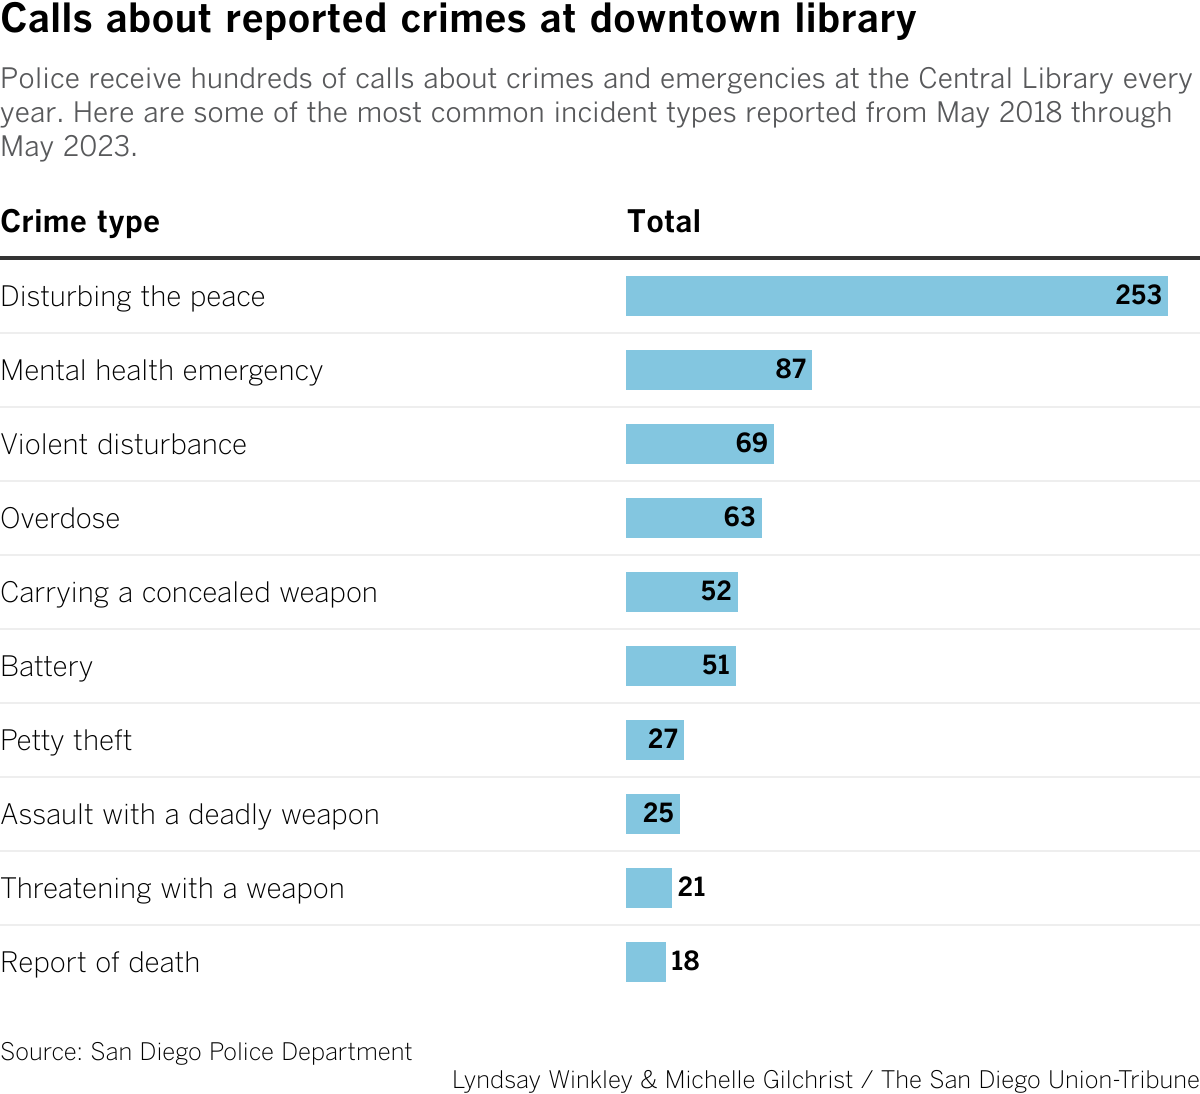 Police receive hundreds of calls about crimes and emergencies at the Central Library every year. Here are some of the most common incident types reported from May 2018 through May 2023.